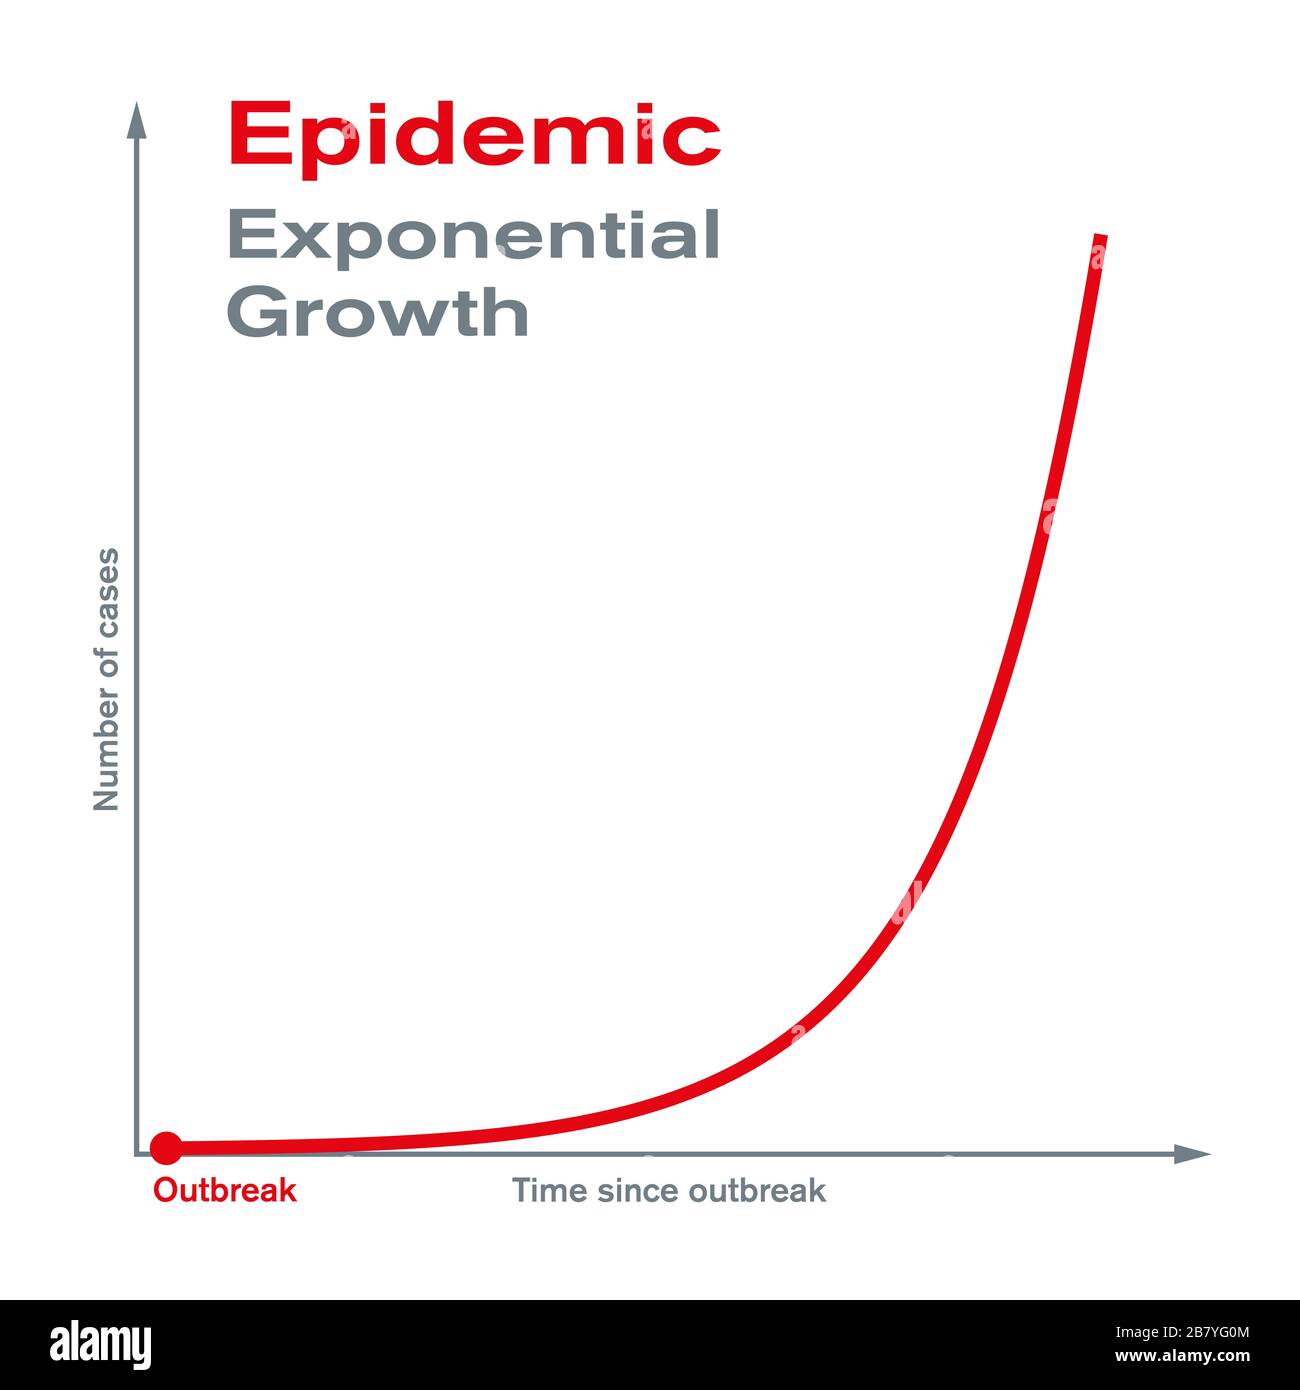 Epidemic. Exponential growth. Rapid spread and epidemic outbreak of a disease to a large number of people in a short period of time. Stock Photo